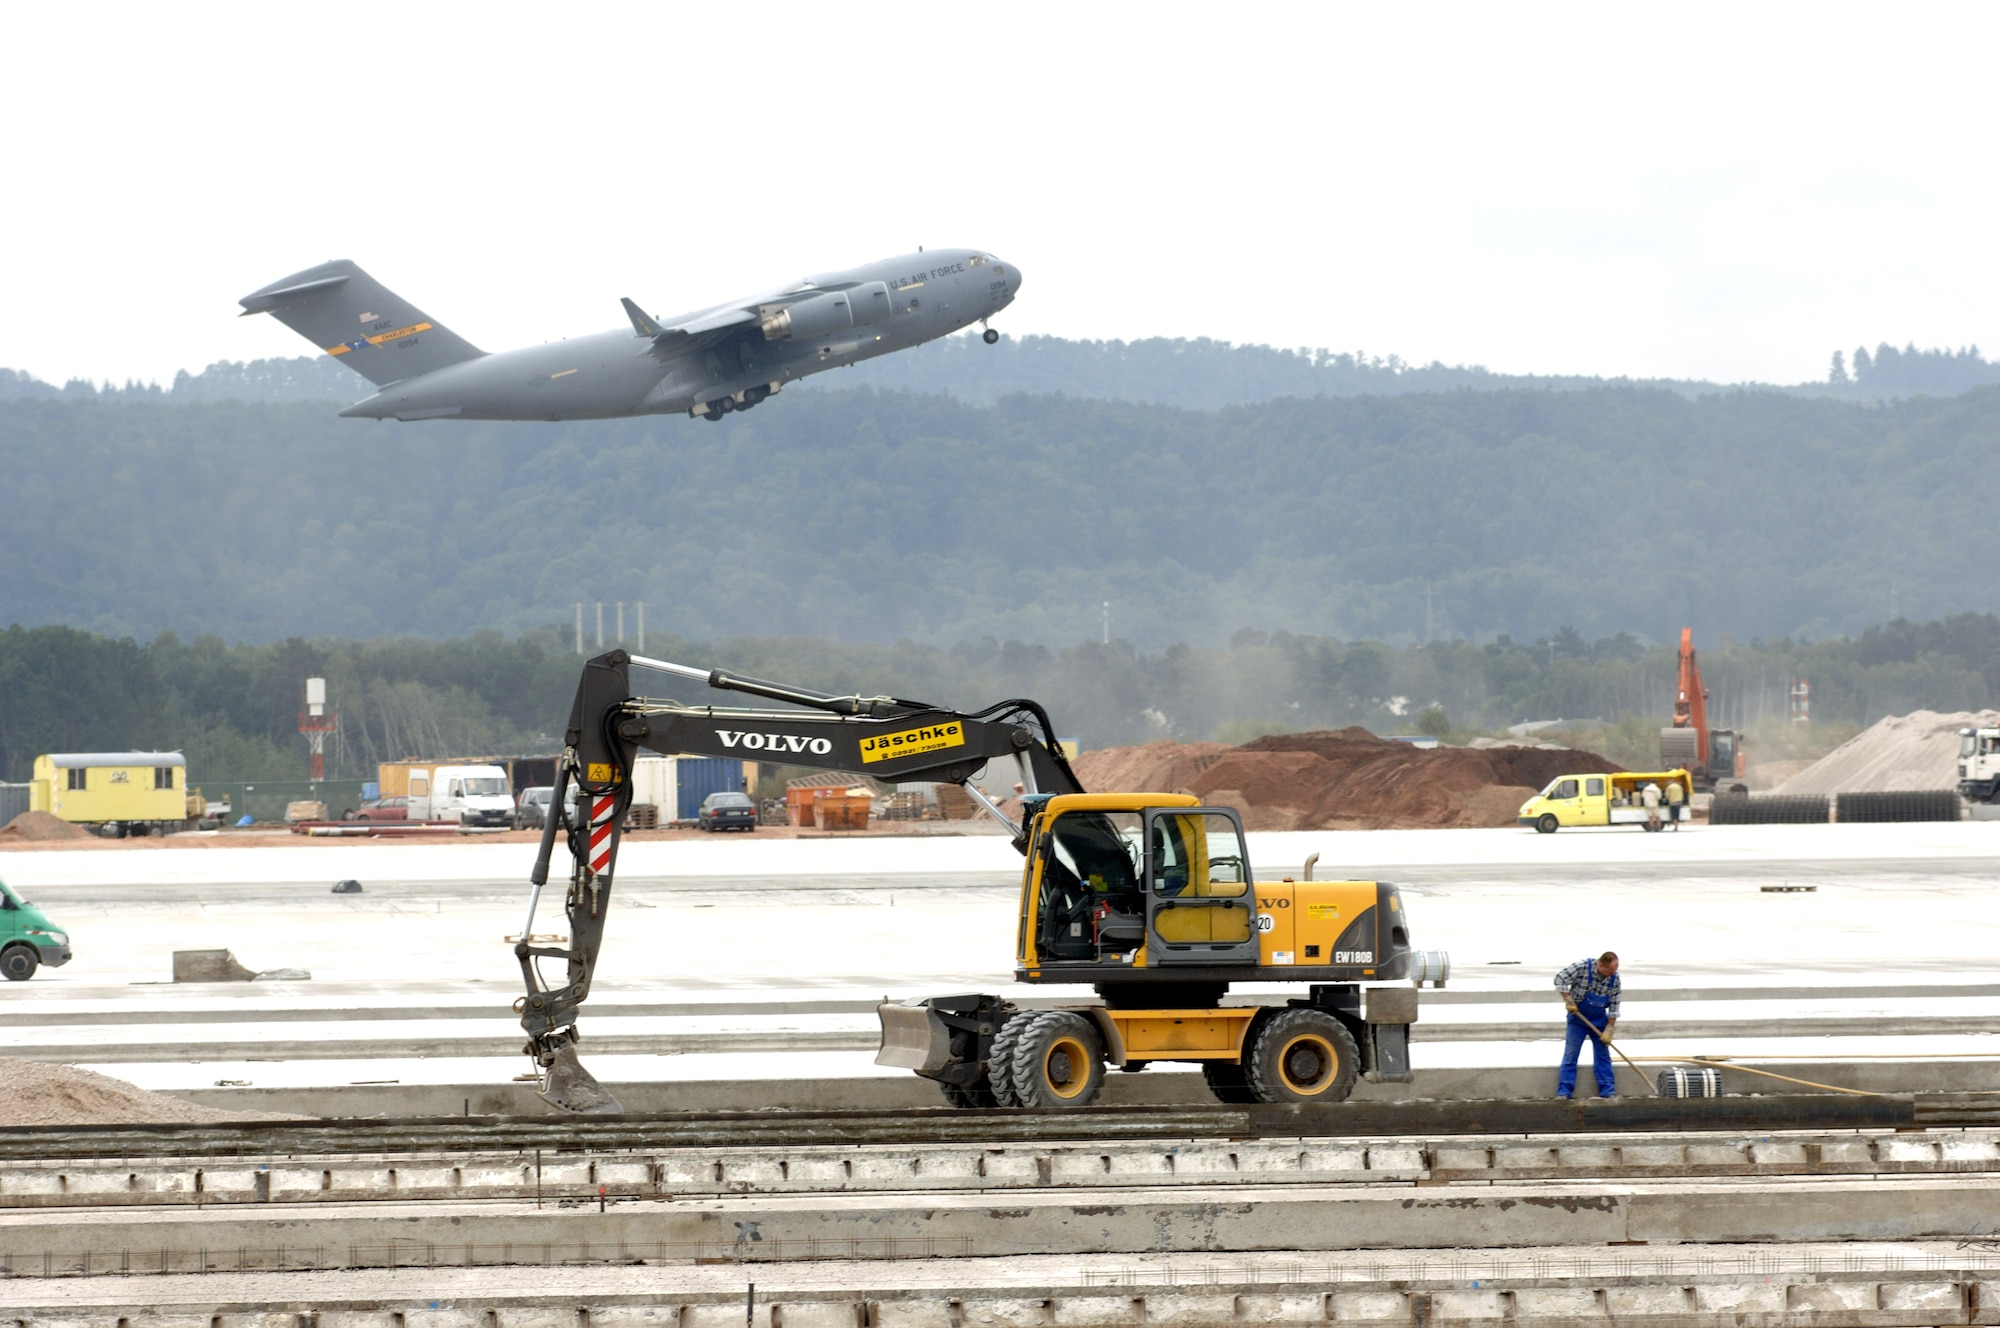 RAMSTEIN AIR BASE, Germany -- A C-17 Globemaster III from Charleston Air Force Base, S.C., takes off from here on a return flight home.  Ongoing construction on the parking ramp, part of the Rhein-Main Transition Program, will make Ramstein the new "Gateway to Europe" when Rhein-Main Air Base closes in December.  (U.S. Air Force photo by Master Sgt. John E. Lasky)